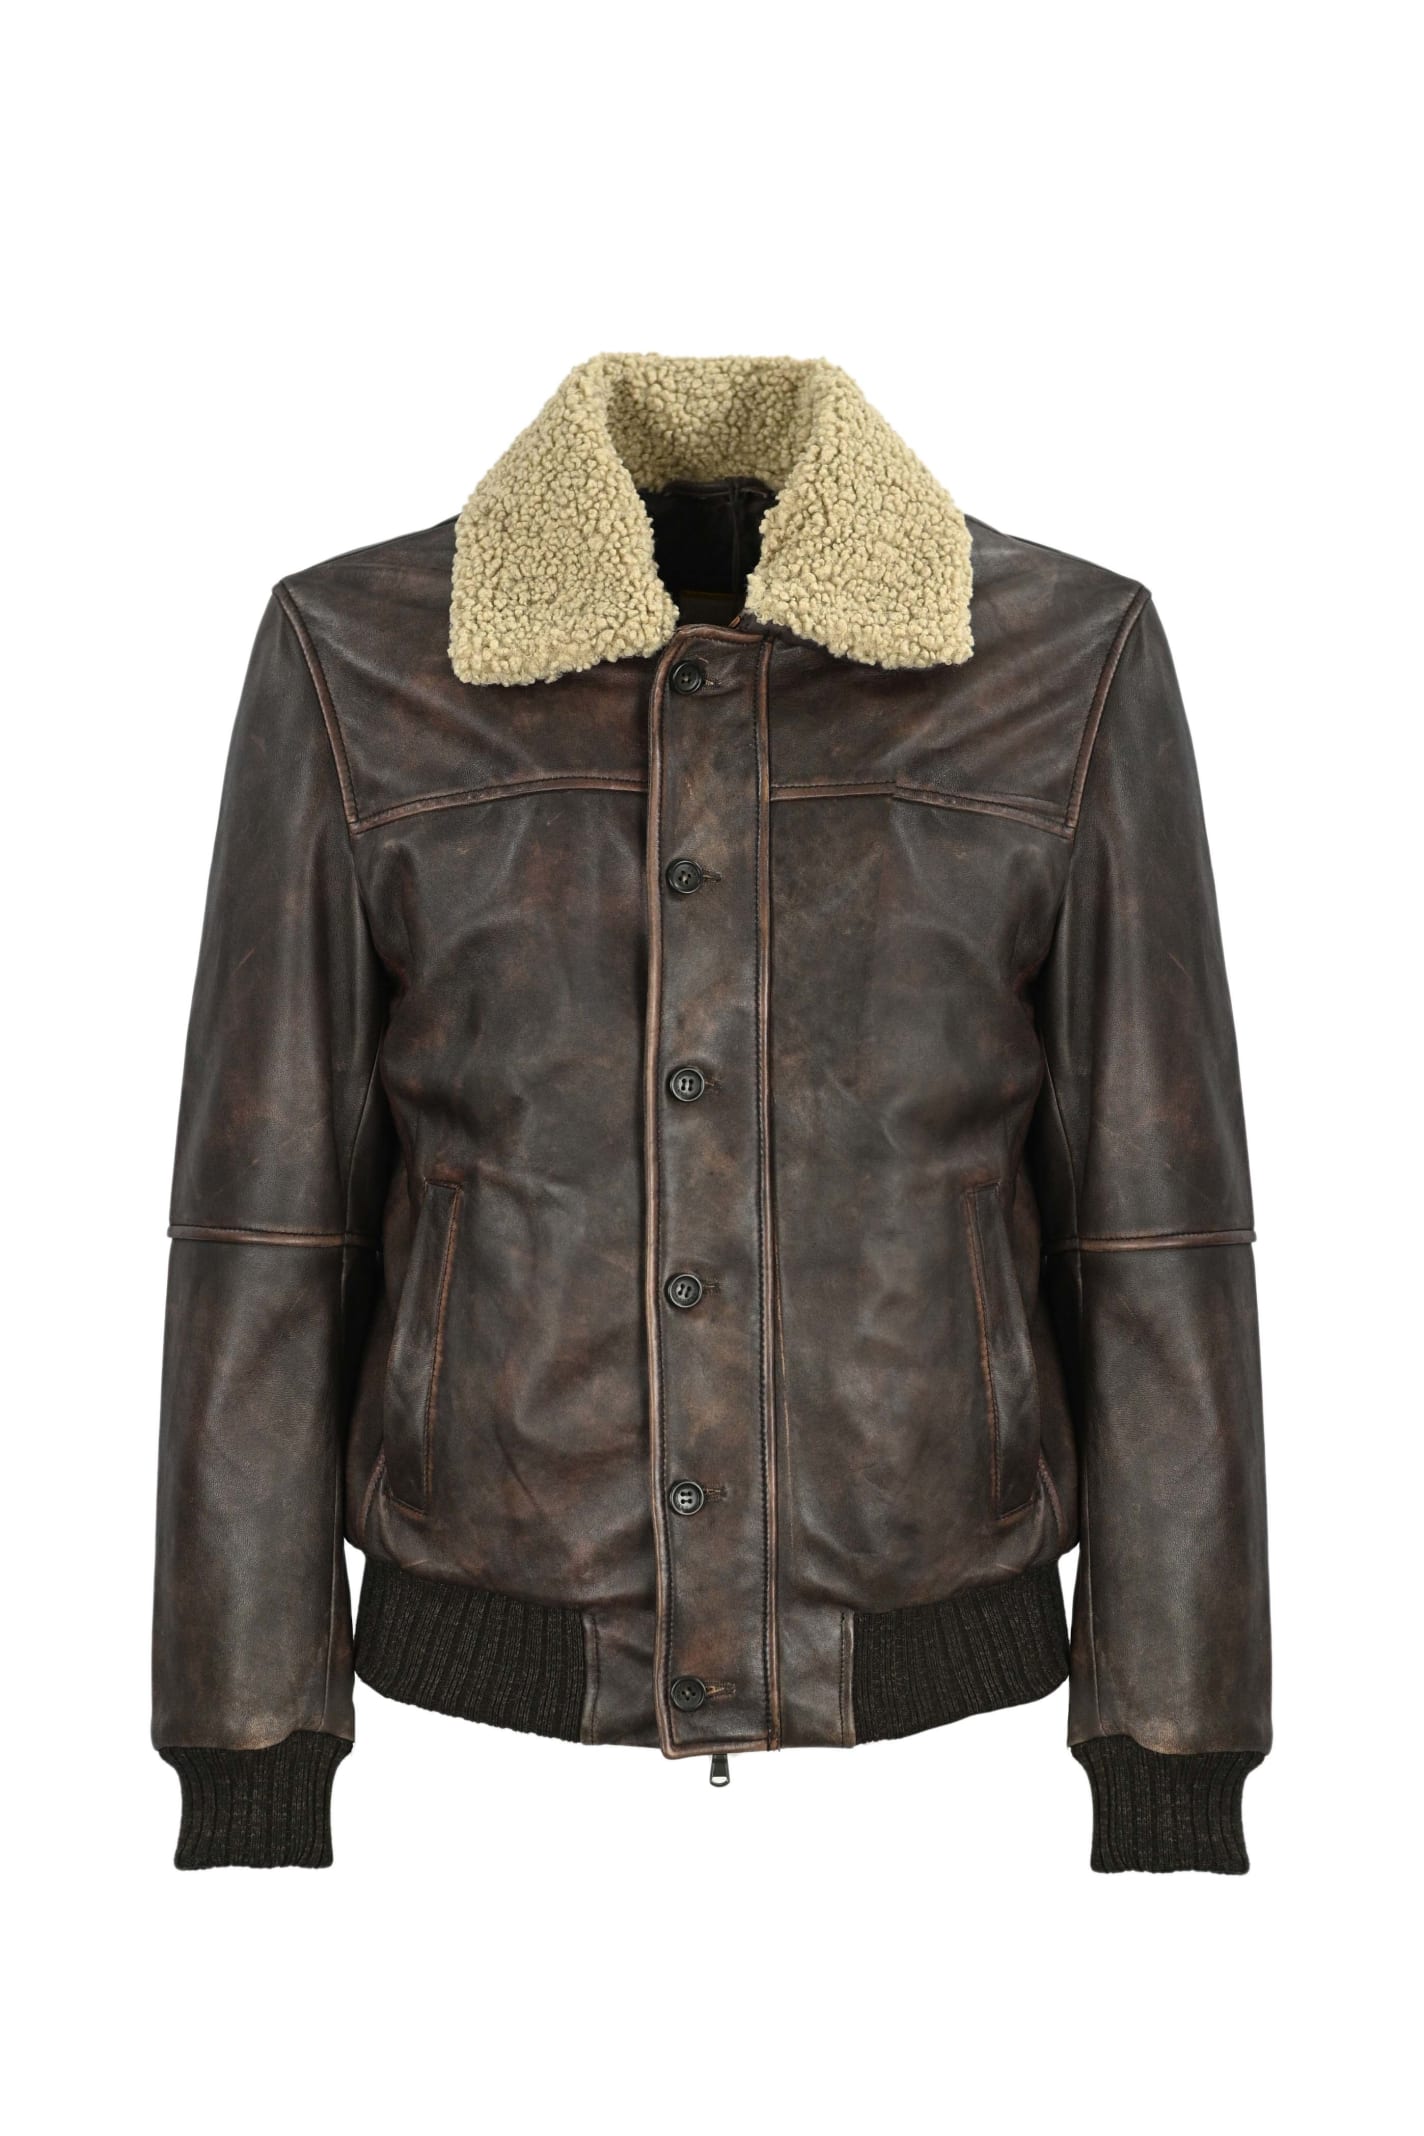 D'Amico Leather Jacket